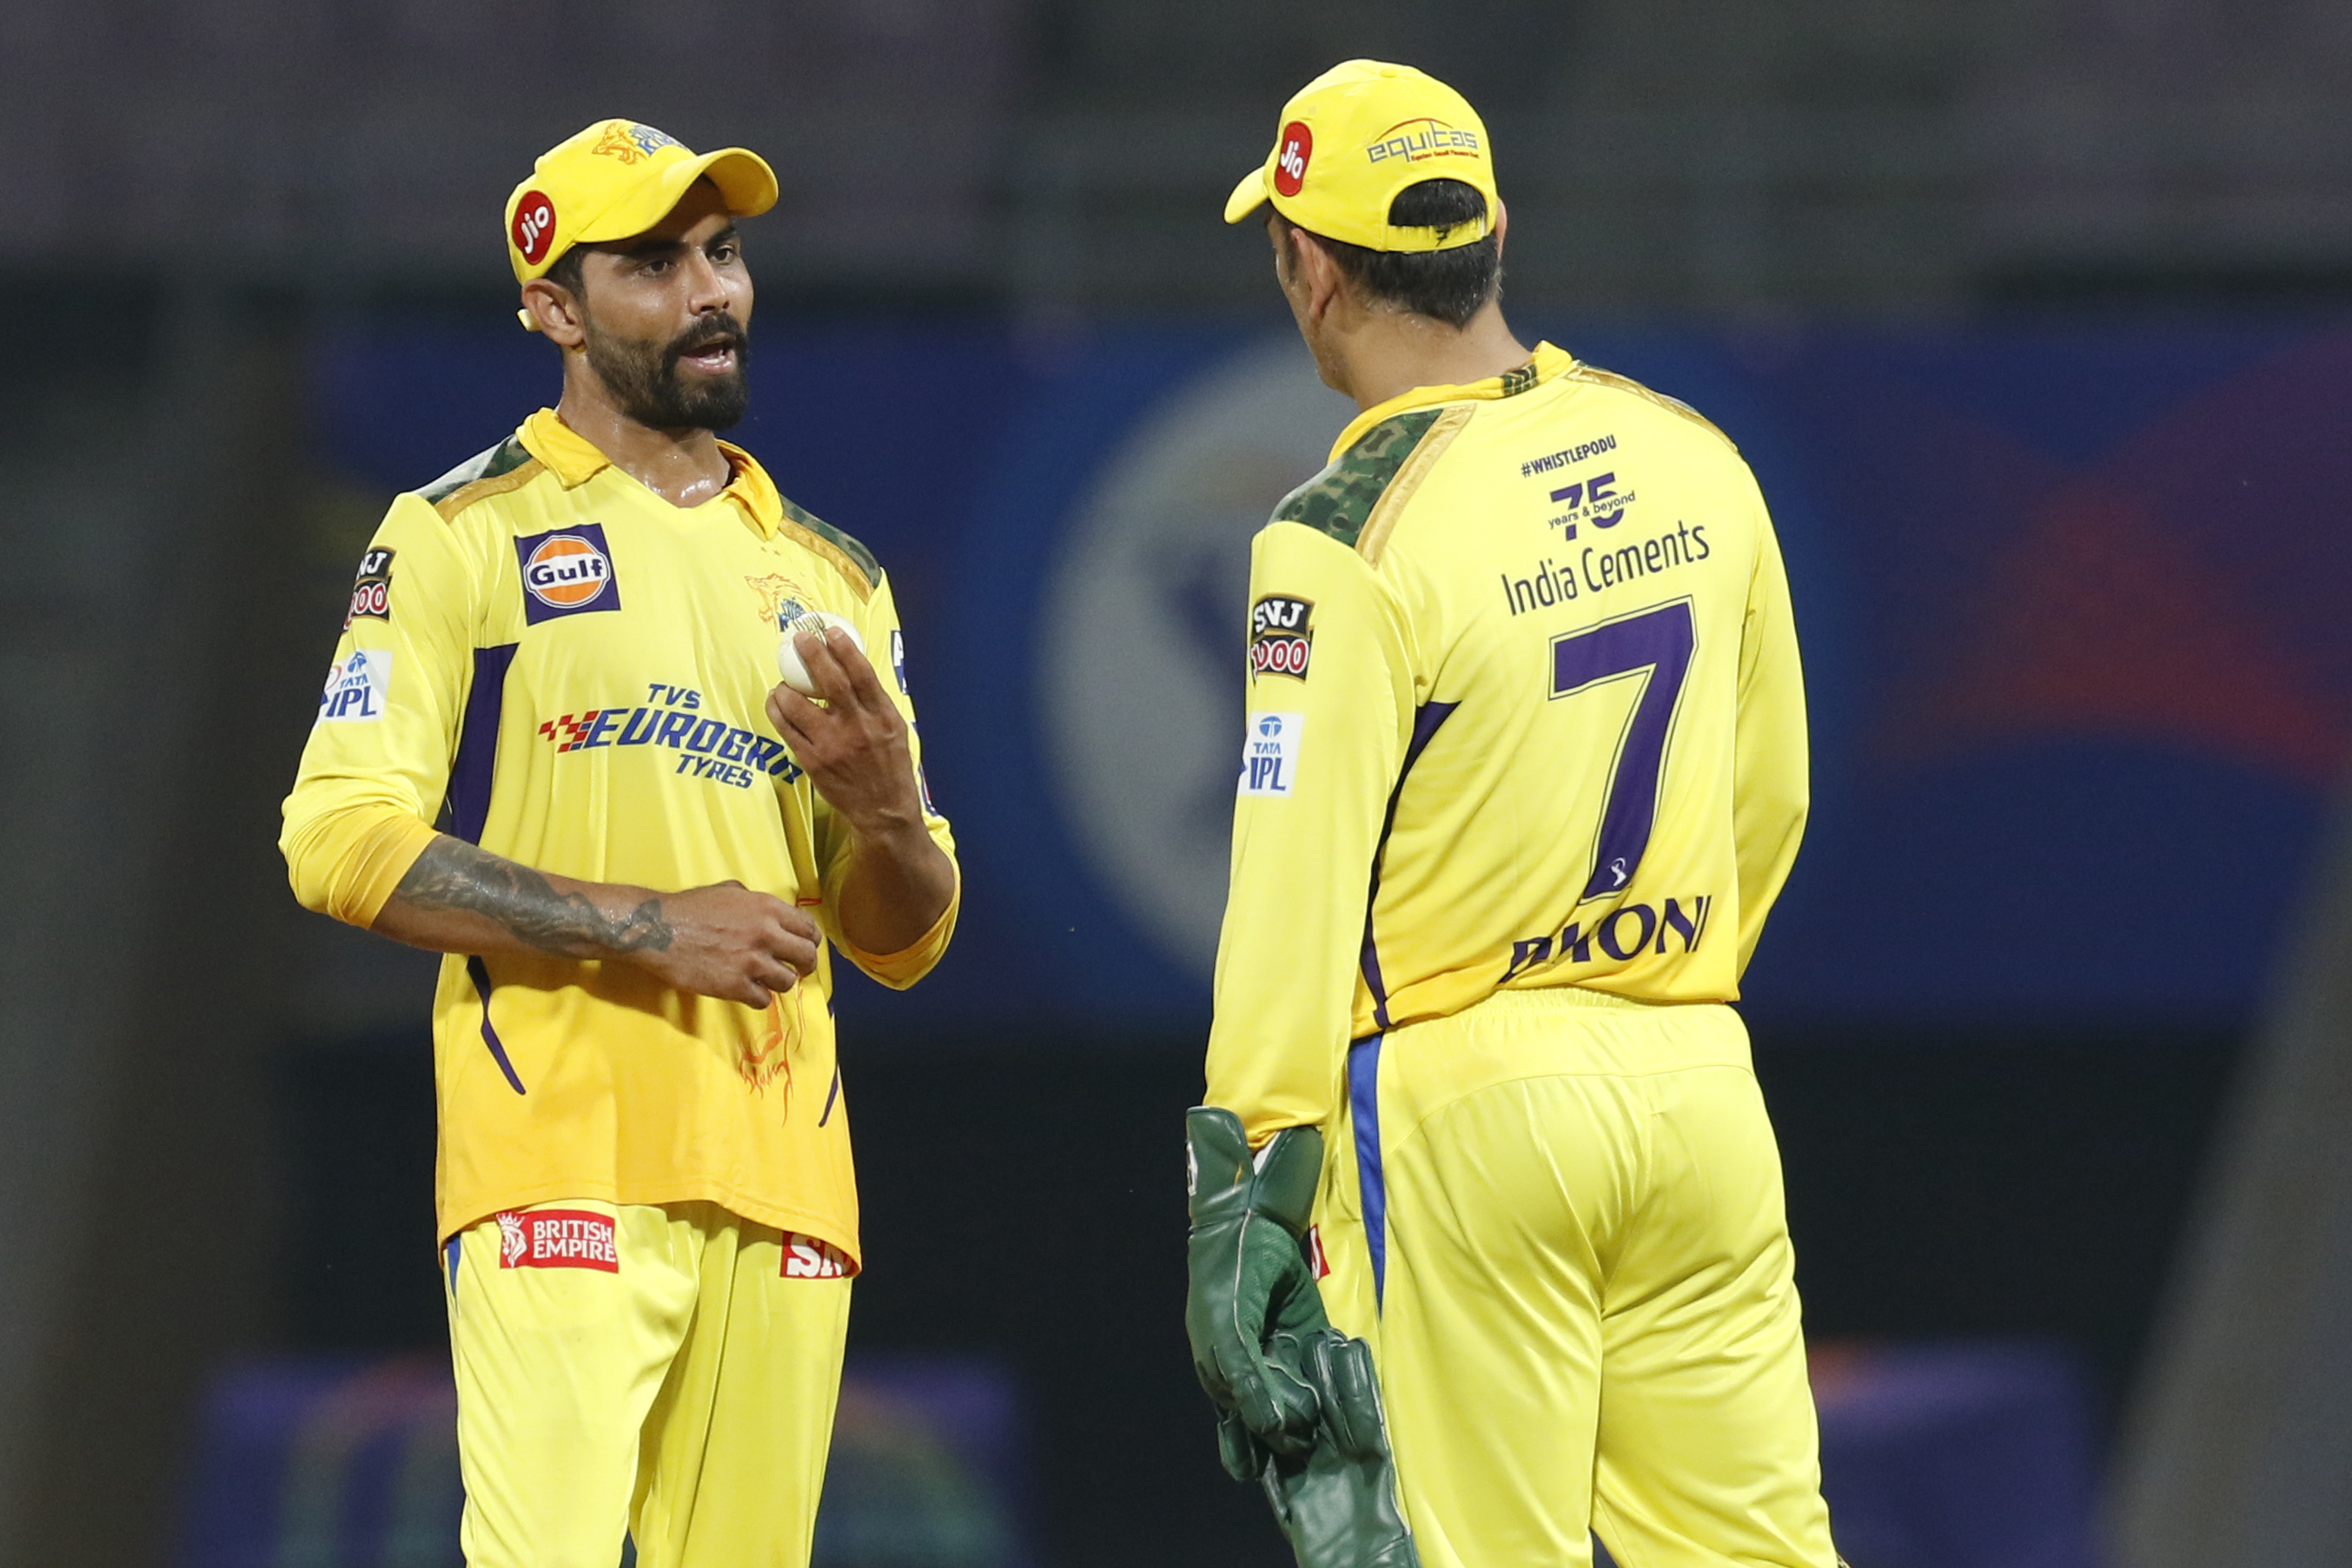 IPL 2022: MS Dhoni makes BIG REVEAL why he took over CSK captaincy, says ‘Jadeja knew and got enough time to prepare’